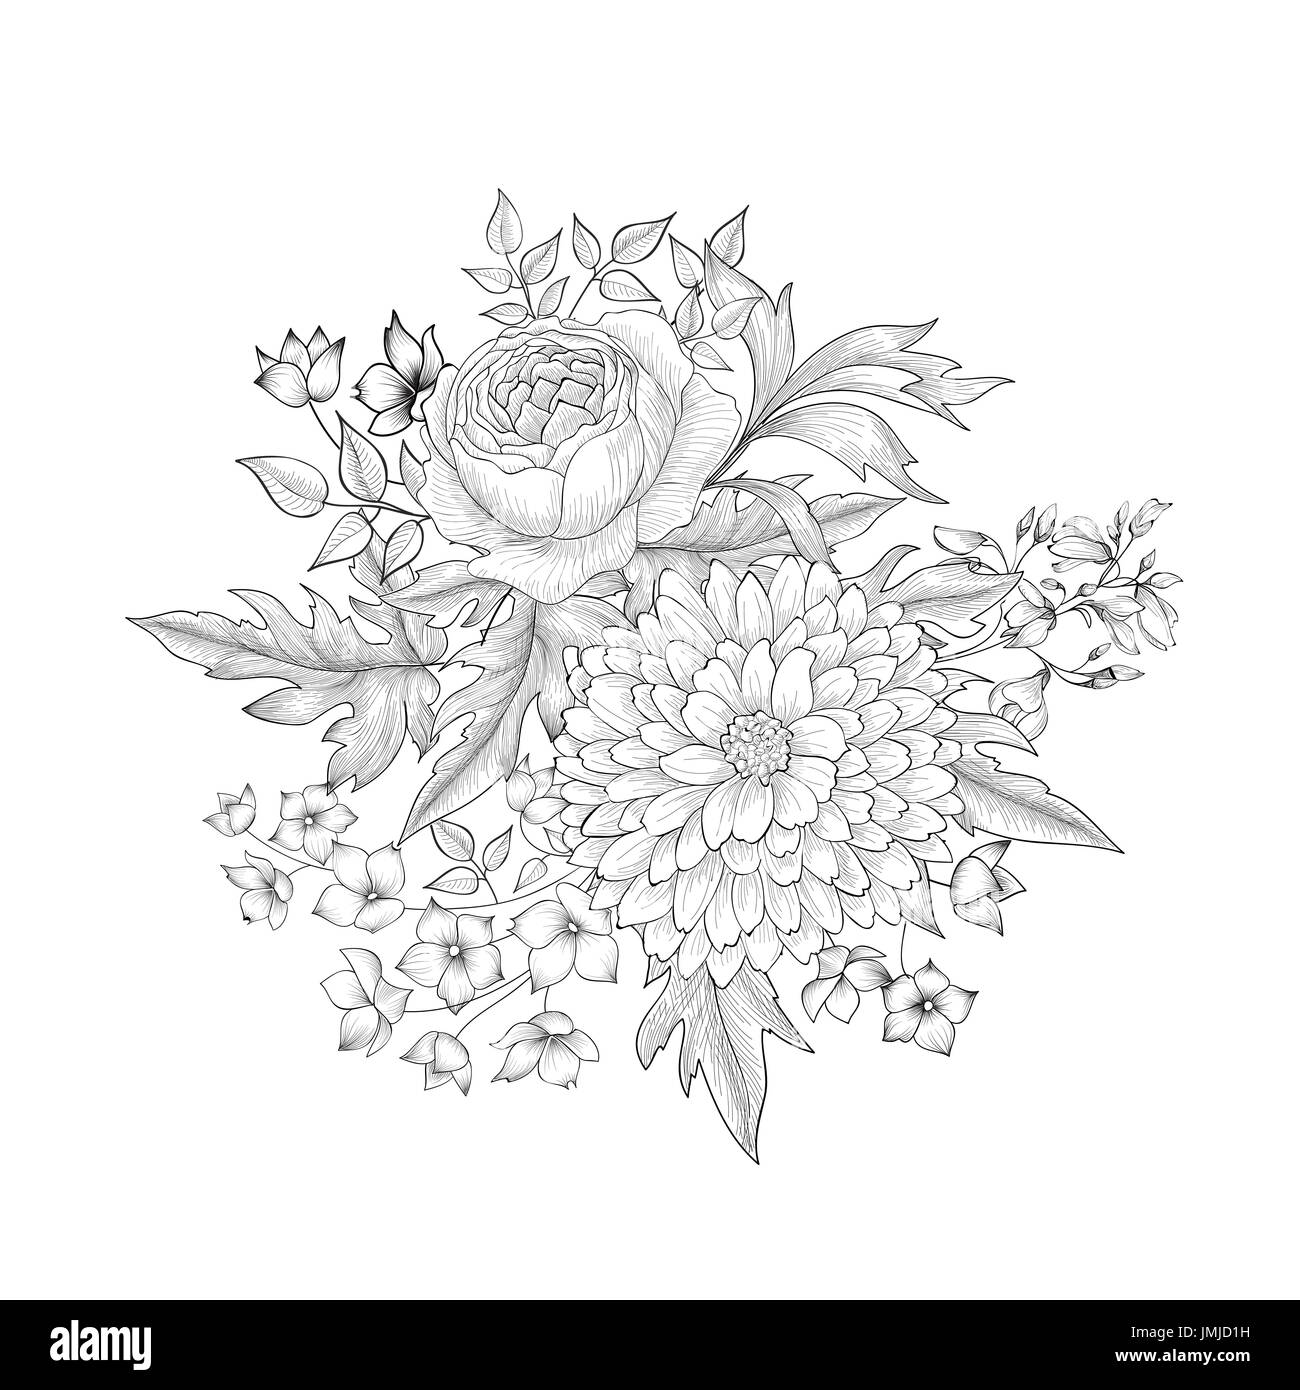 Simple Vintage Flower Bouquet Sketch Hand Drawn Botanical Illustration  with Line Art Flowers Black Ink Sketch Florals Stock Illustration   Illustration of bouquet greeting 231061641